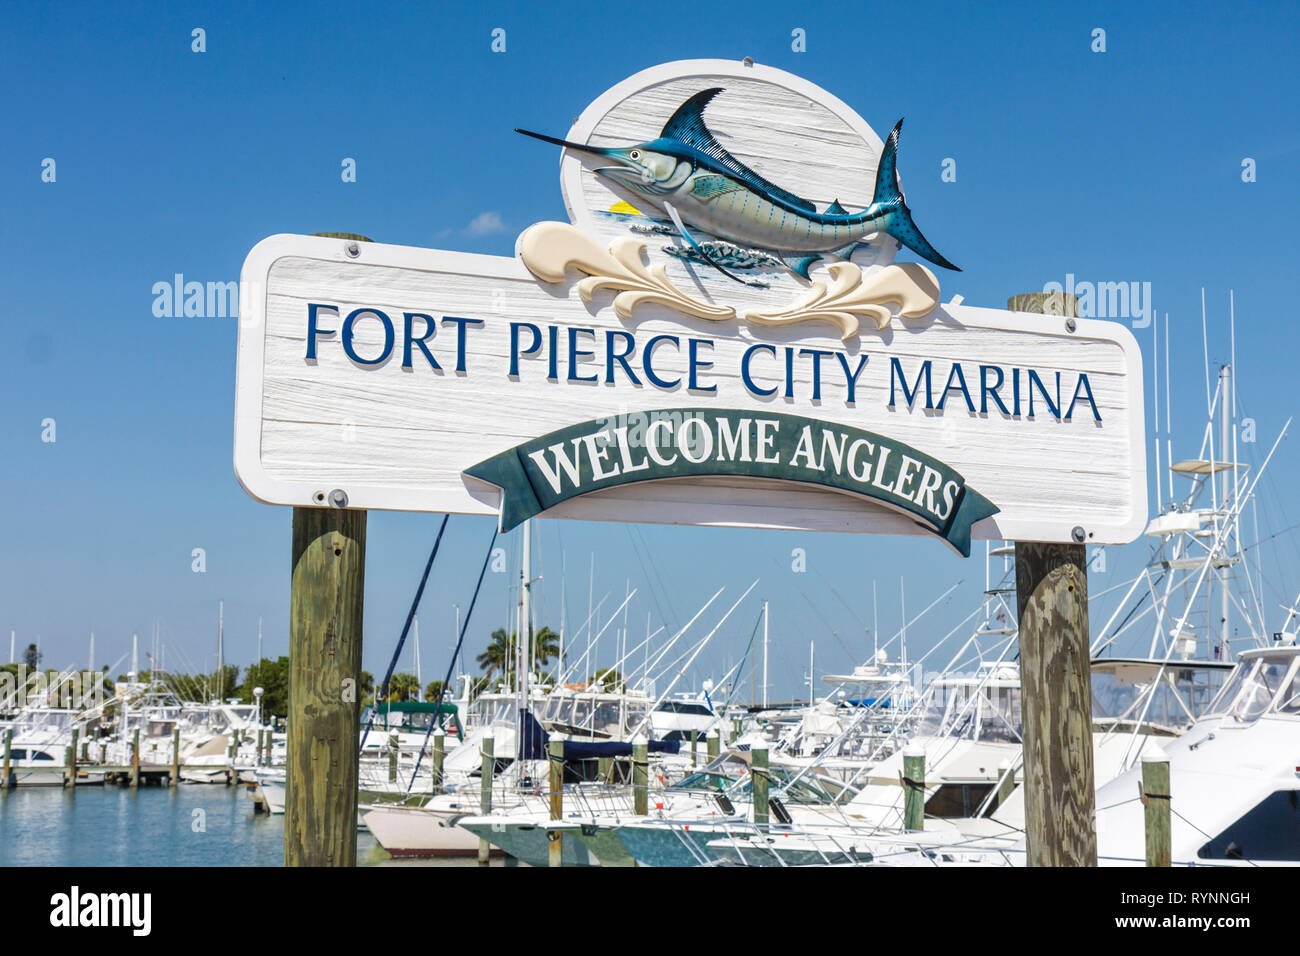 Florida Saint St. Lucie County,Fort Ft. Pierce,Indian River Lagoon,Fort Pierce City Marina,sign,carved wood,marlin,boat,boating,yacht,navigation,recre Stock Photo